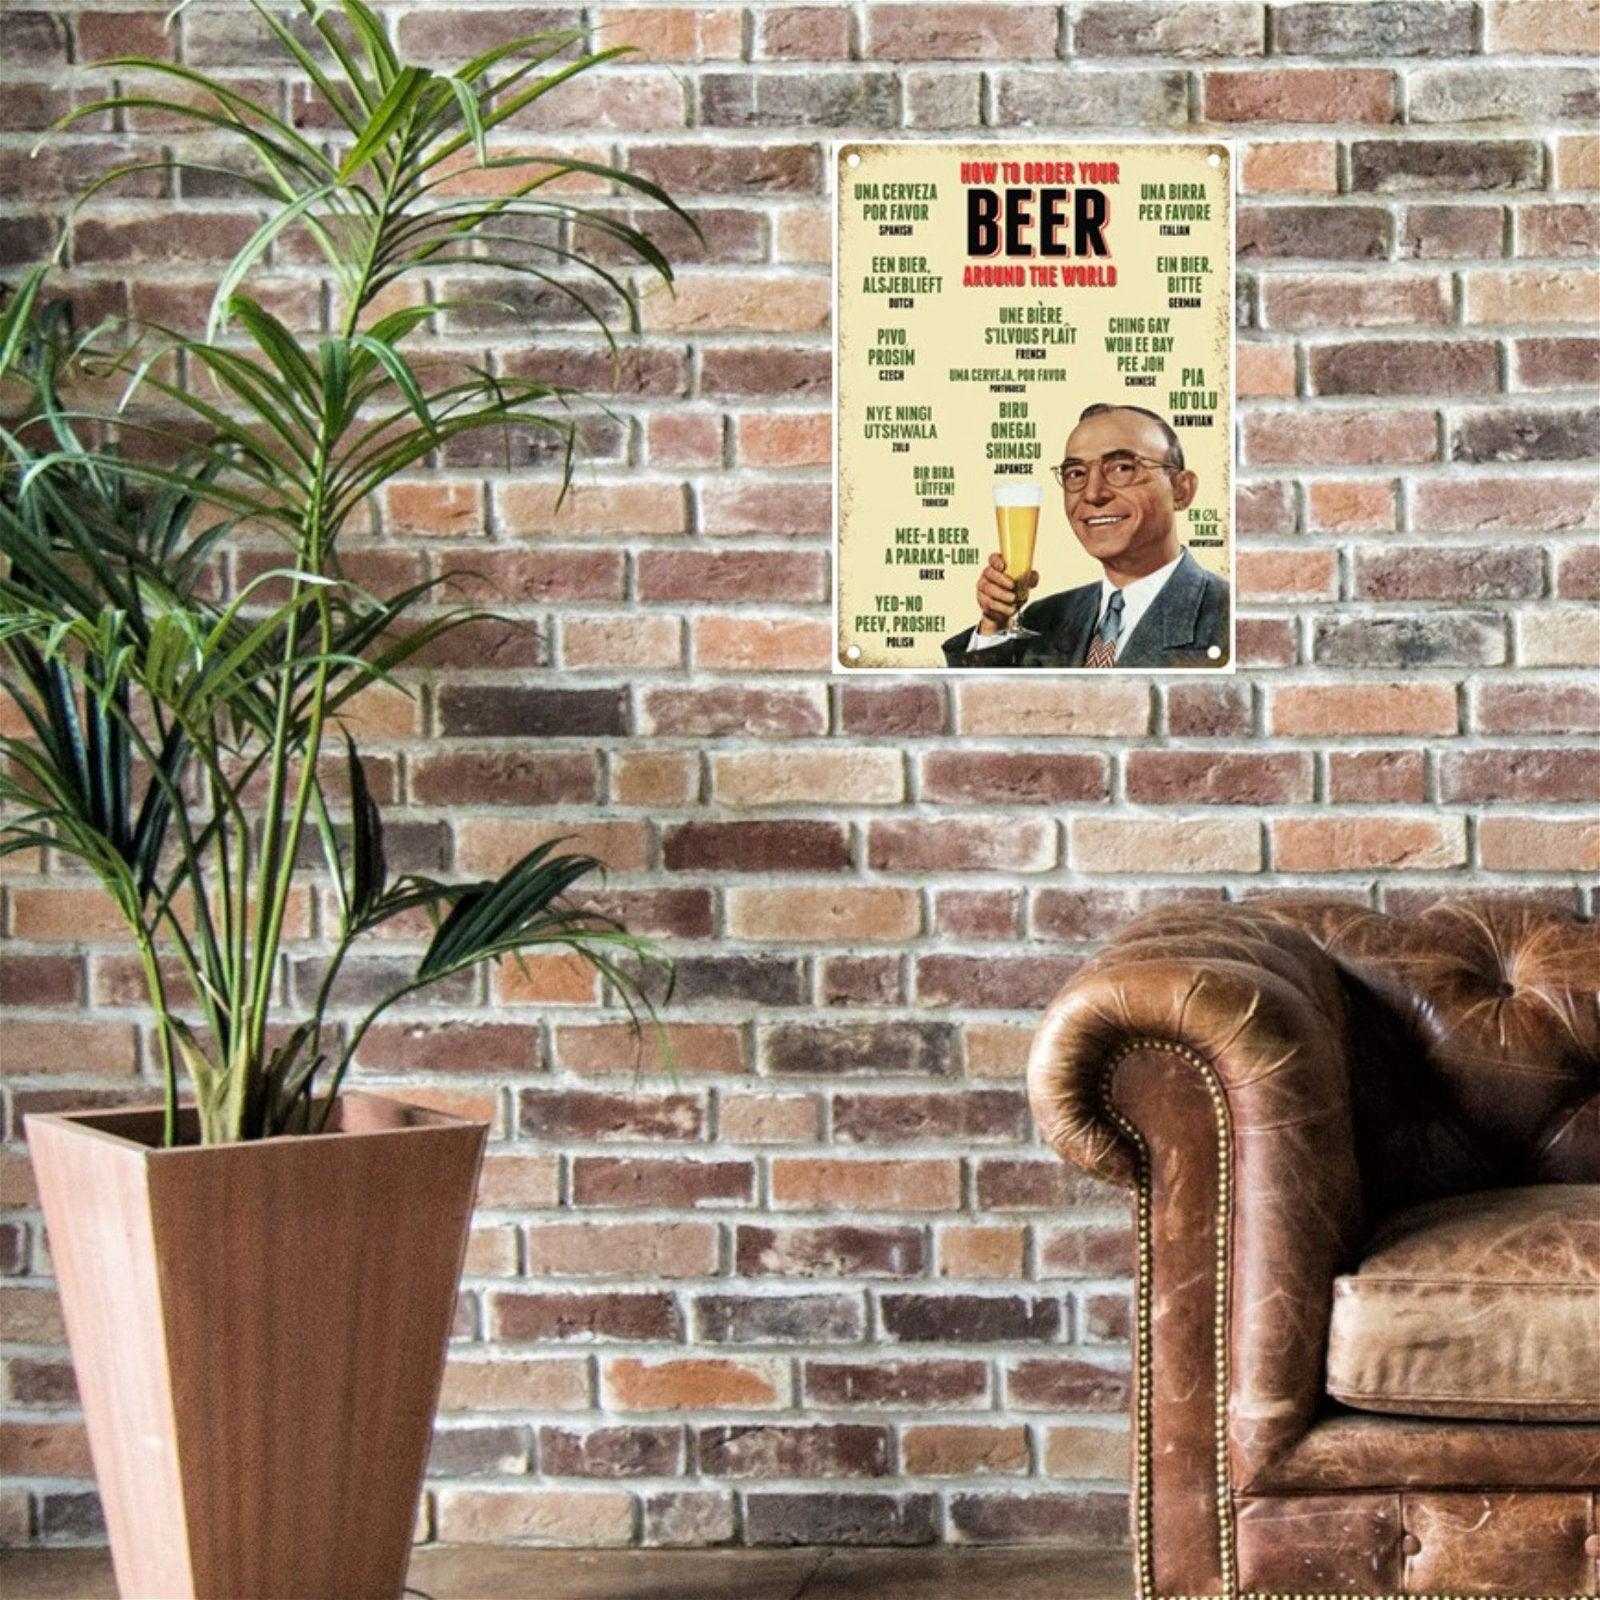 View Large Metal Sign 60 x 495cm Beer How to Order your Beer information